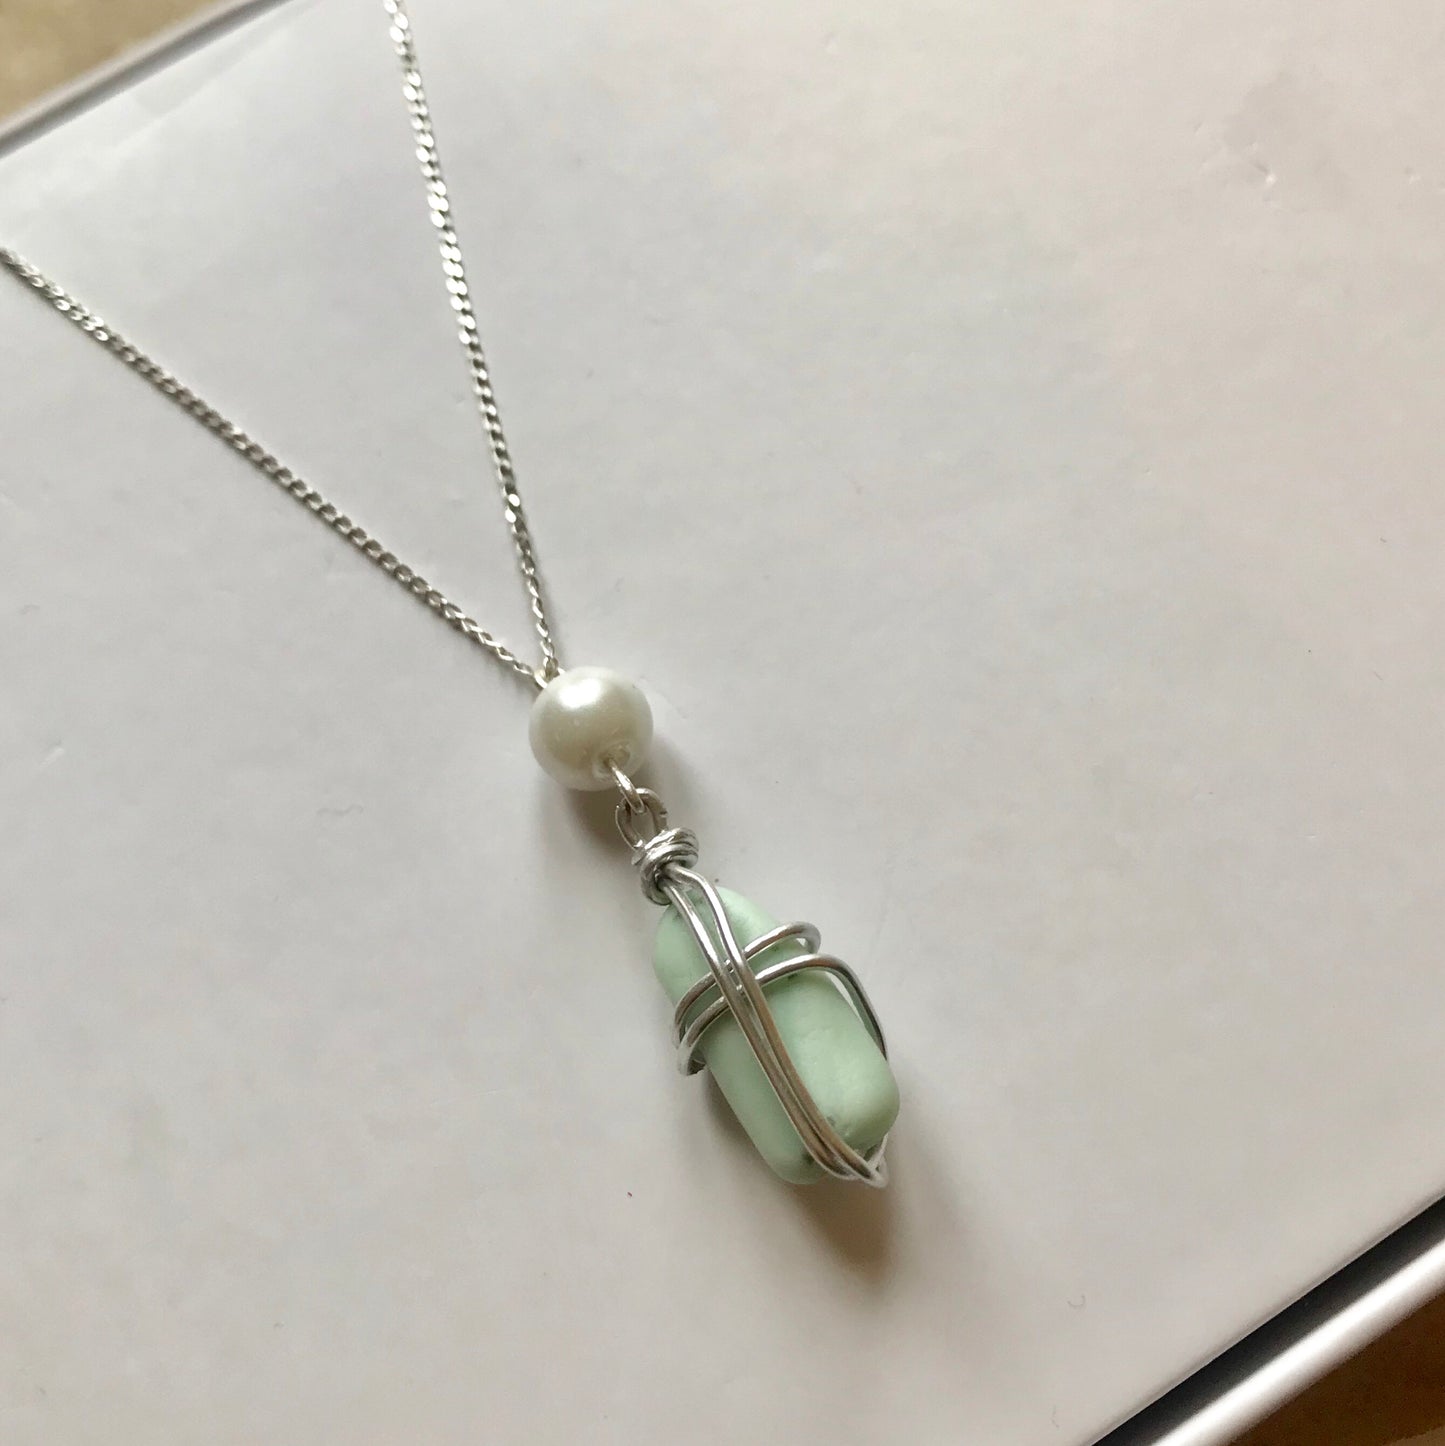 Seaham Sea Glass - Pale Blue Milk Glass - Pendant on 20” Sterling Silver Chain